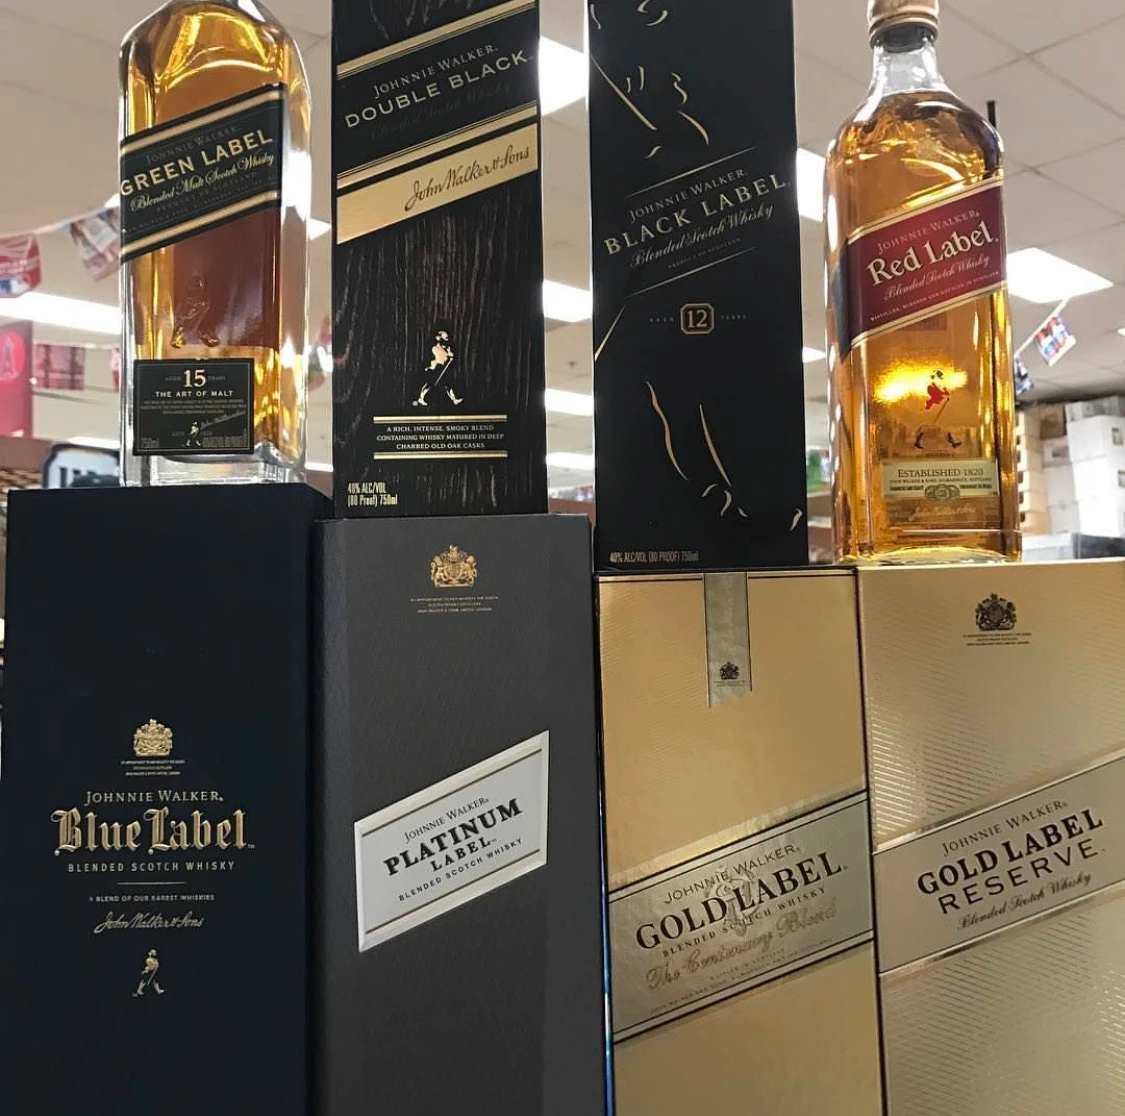 Johnnie Walker Double Black Label Old Scotch Whisky - Buy